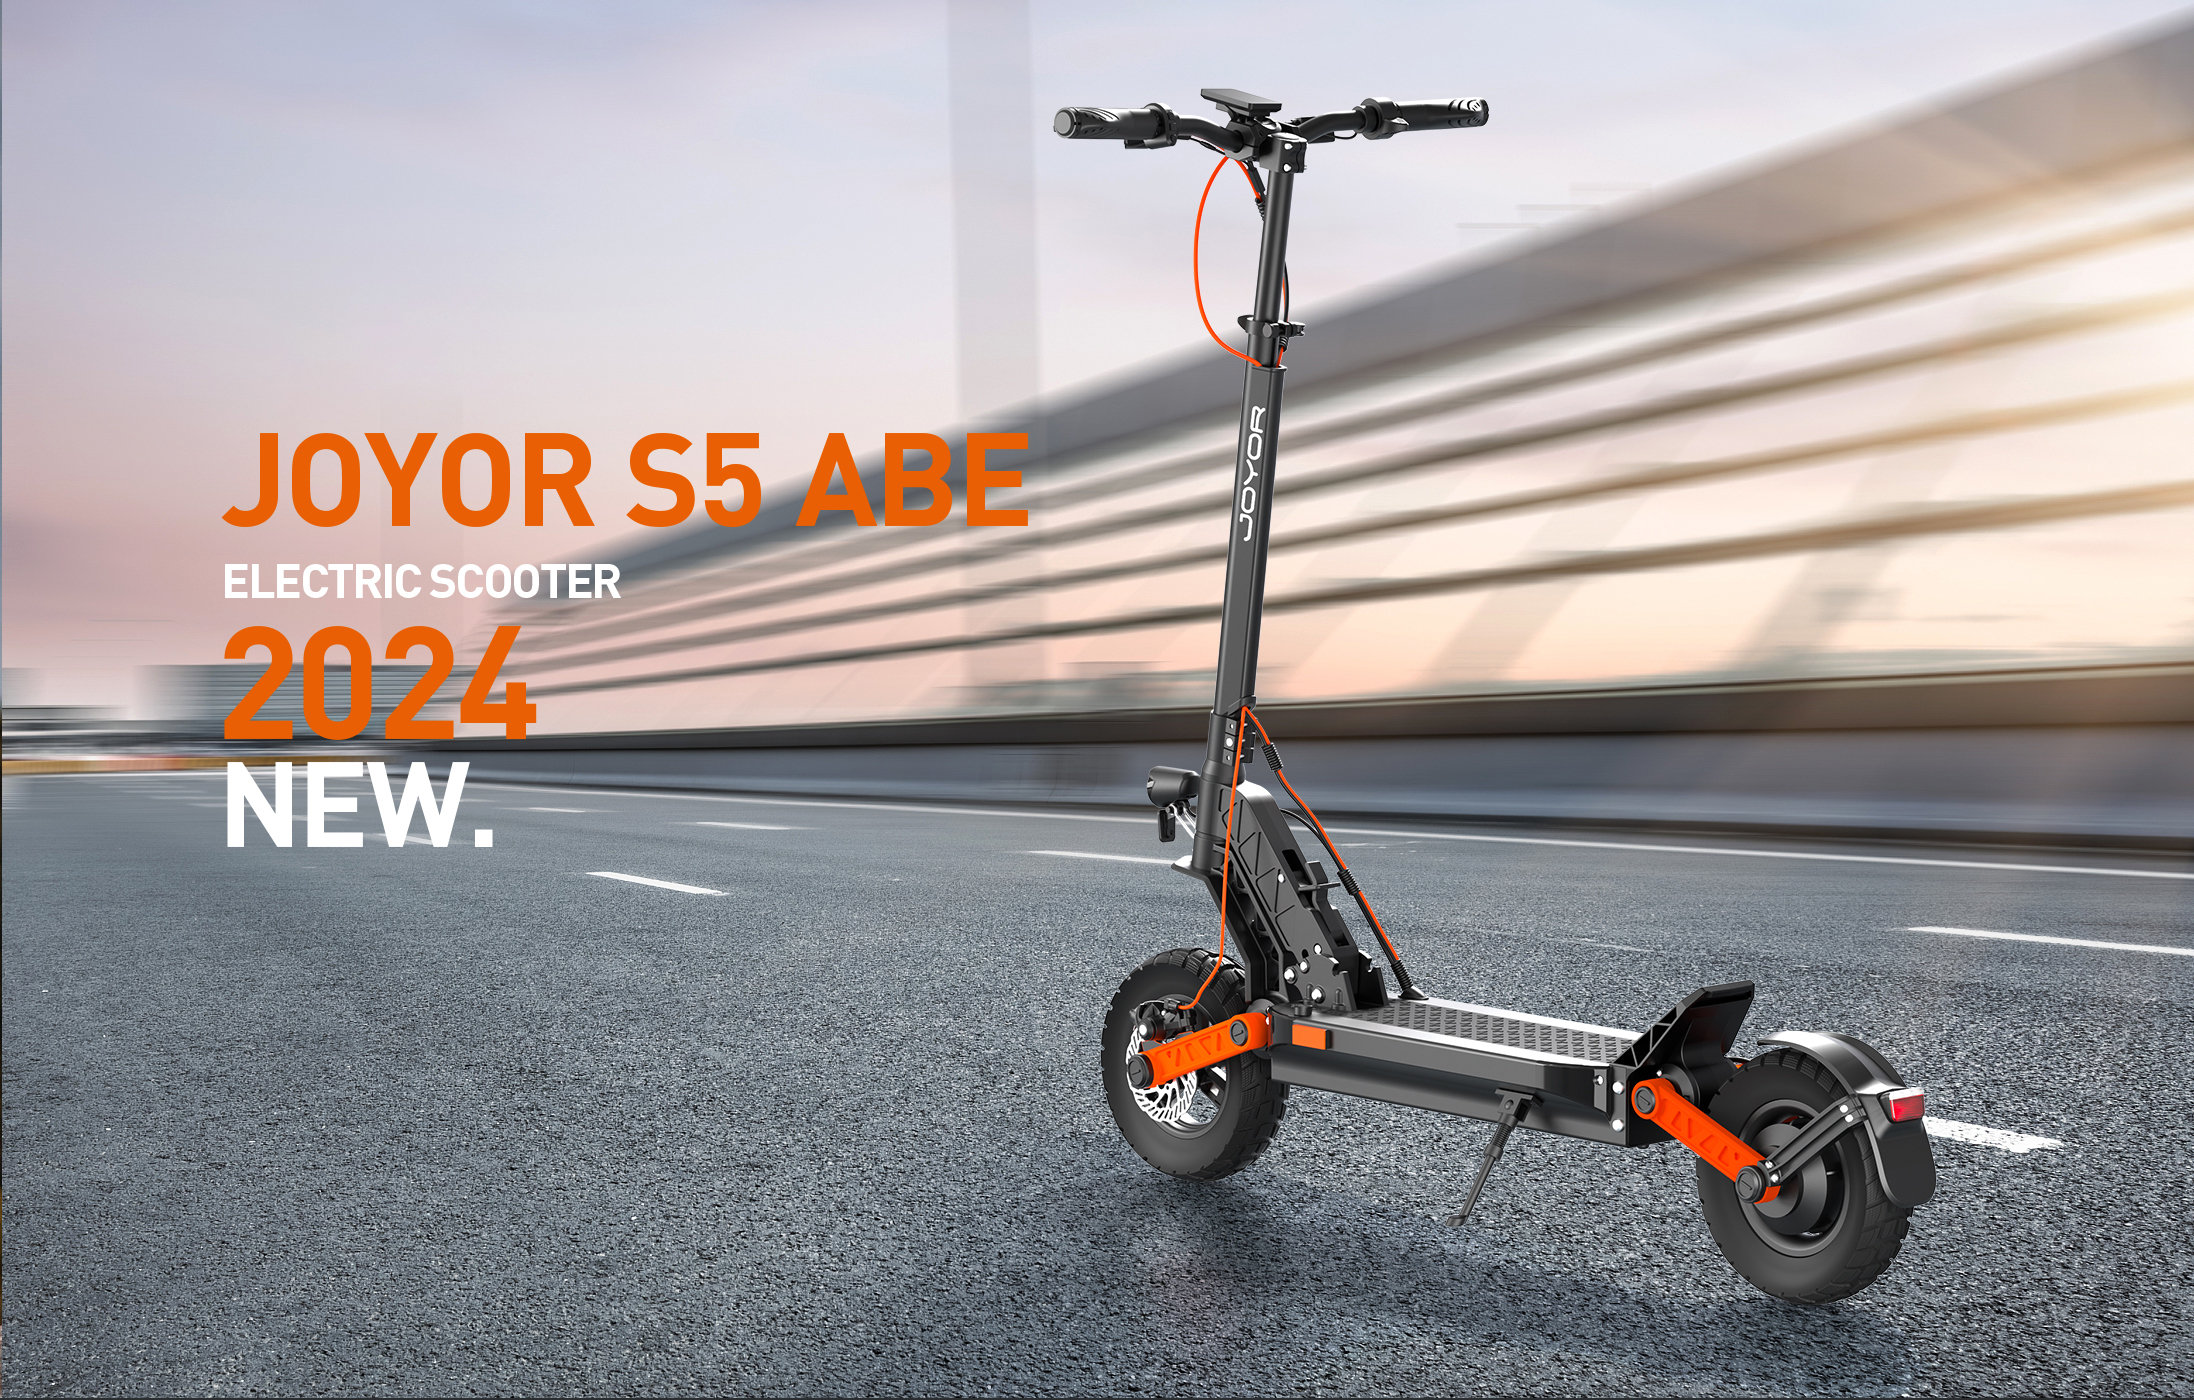 JOYOR S5 with Road Approval (ABE),10 Tires Foldable Electric Scooter Suspension,500W Brushless DC Motor & 48V 13Ah Battery